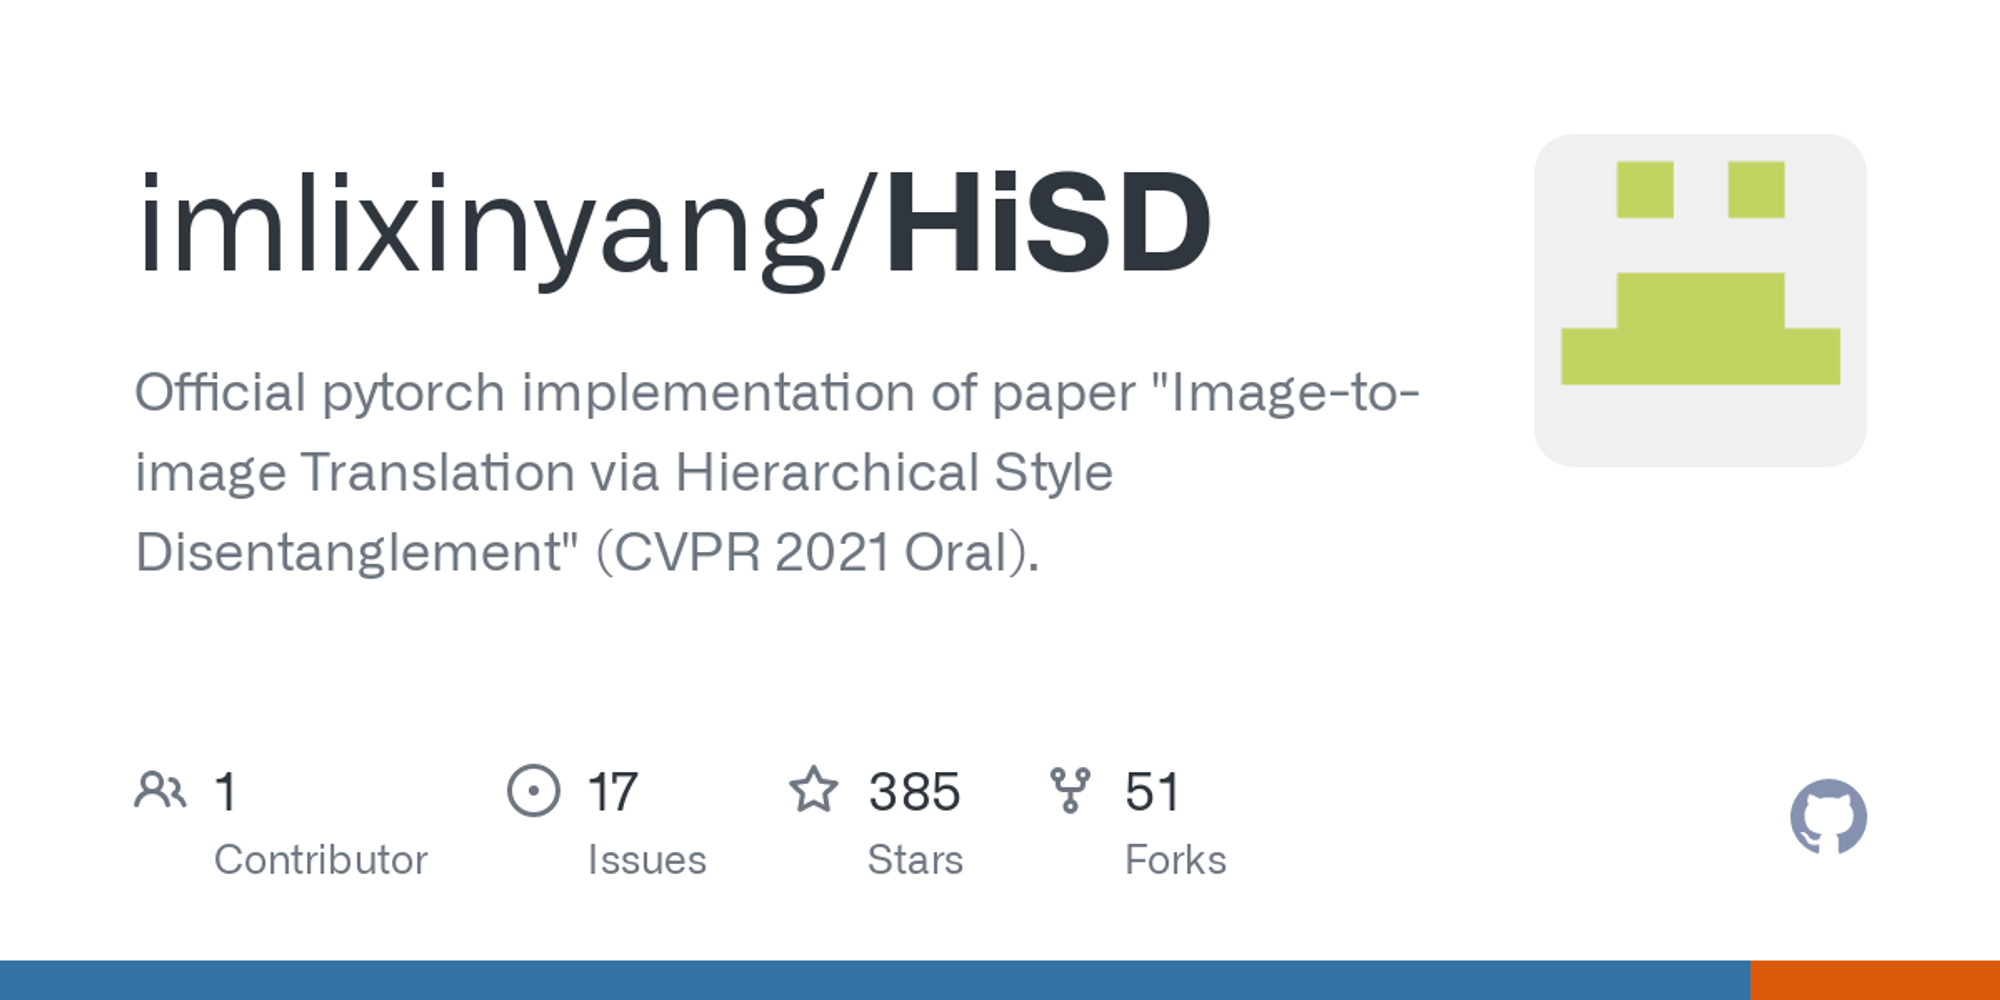 GitHub - imlixinyang/HiSD: Official pytorch implementation of paper "Image-to-image Translation via Hierarchical Style Disentanglement" (CVPR2021 Oral).